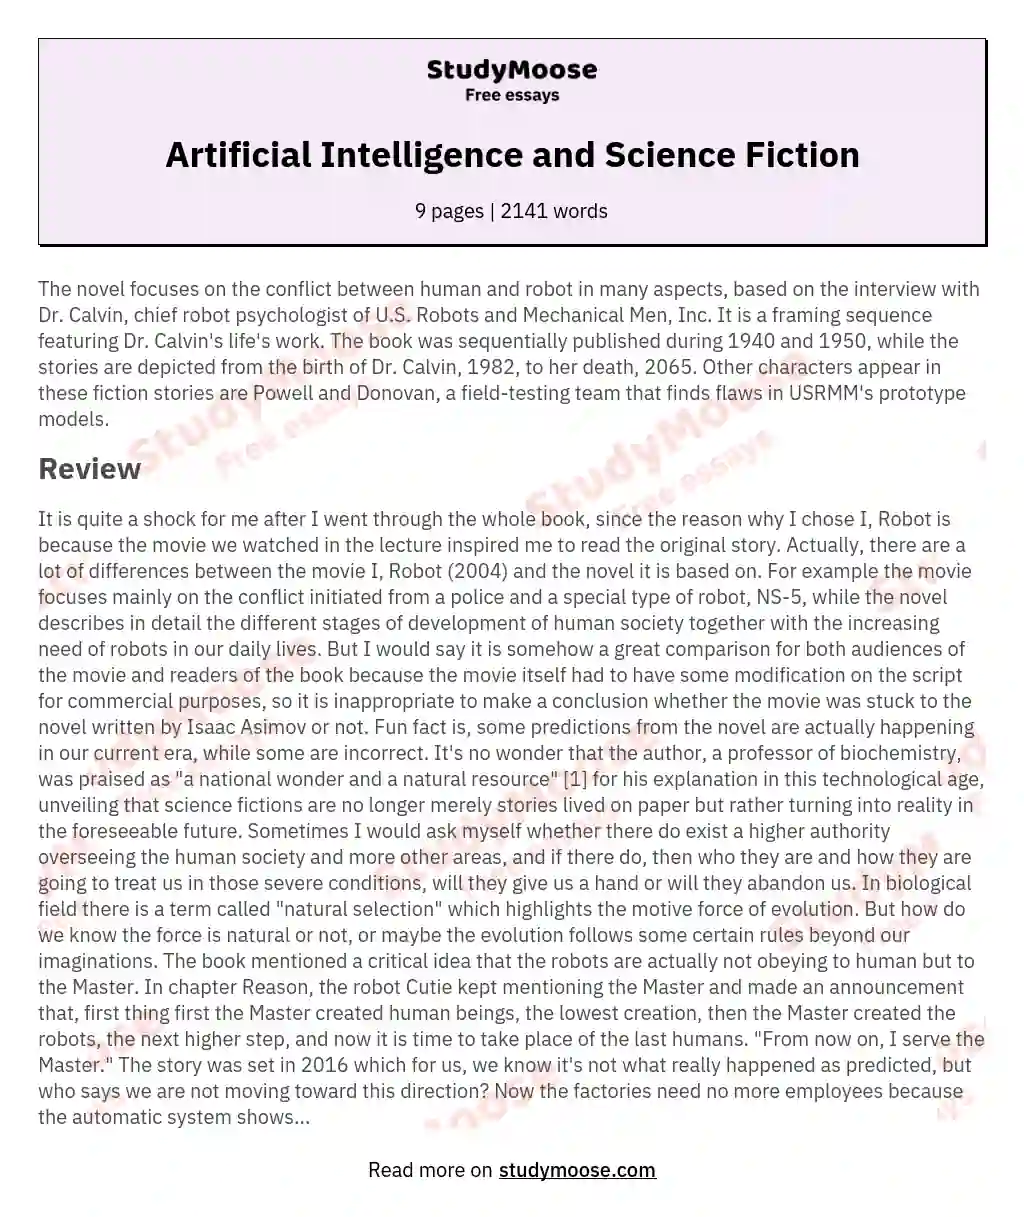 Artificial Intelligence and Science Fiction essay